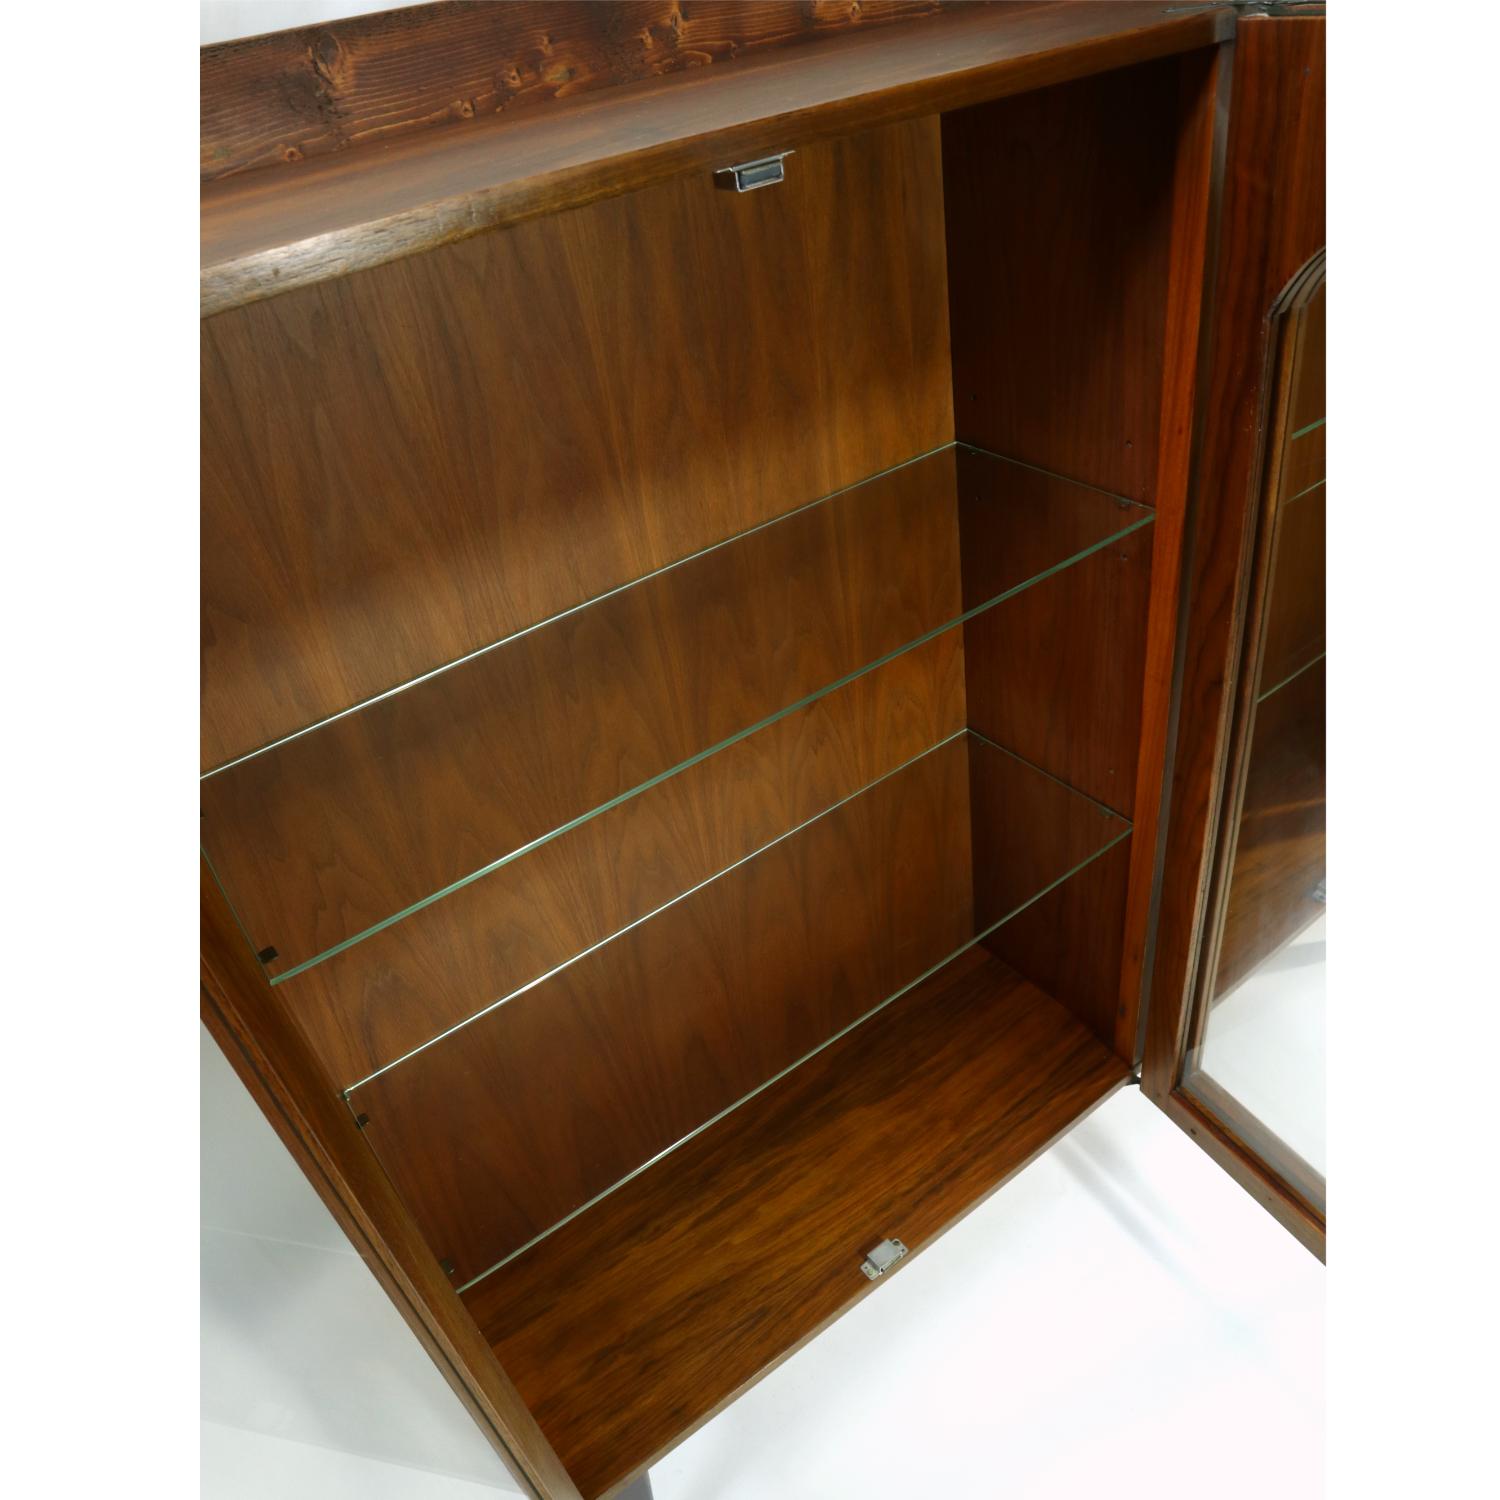 Mid-20th Century Mid-Century Modern Walnut China Cabinet with Arched Facade